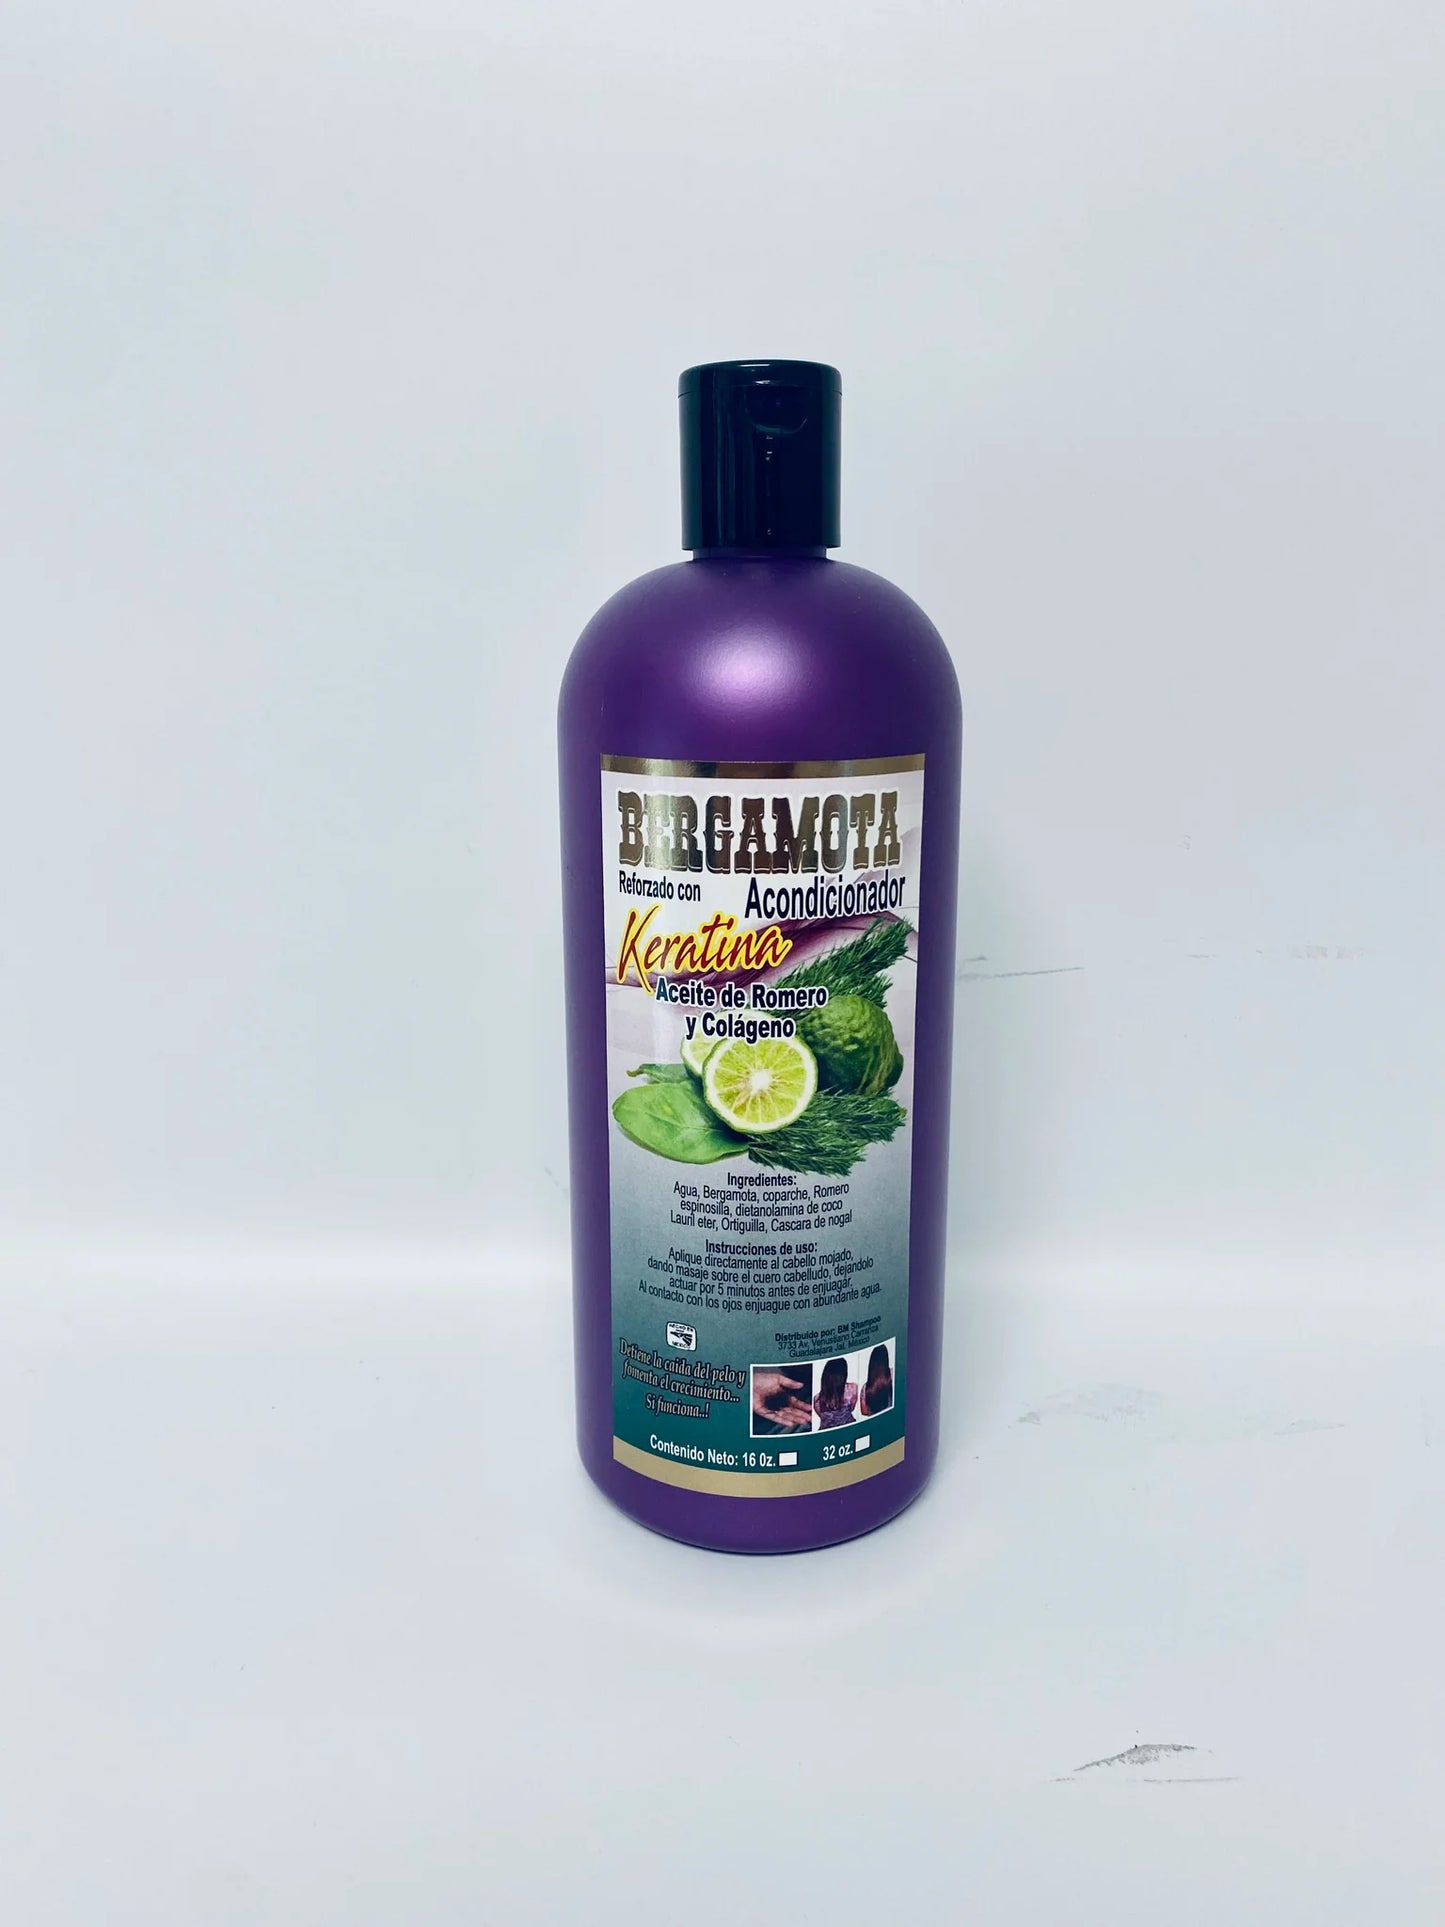 Bergamota Conditioner with Keratin Rosemary and Collagen